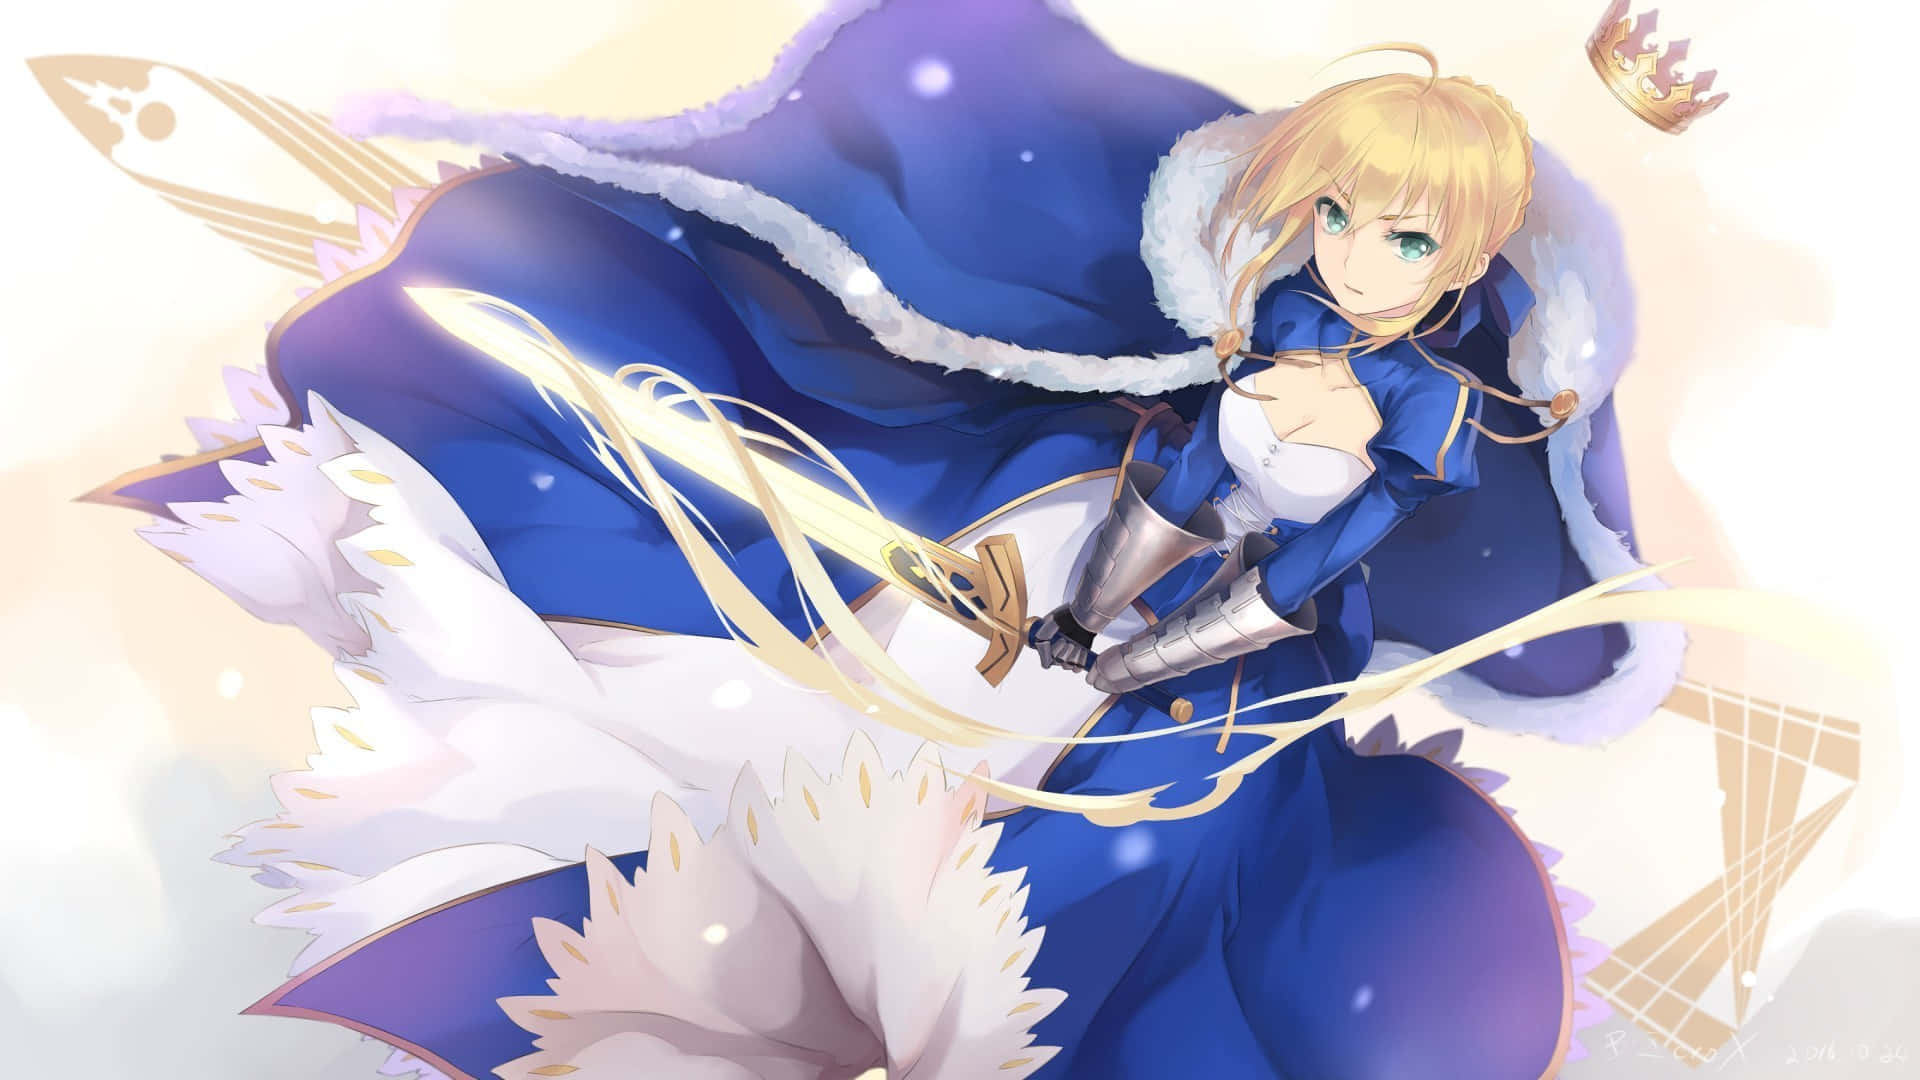 Saber Fate Stay Night With Cape Wallpaper